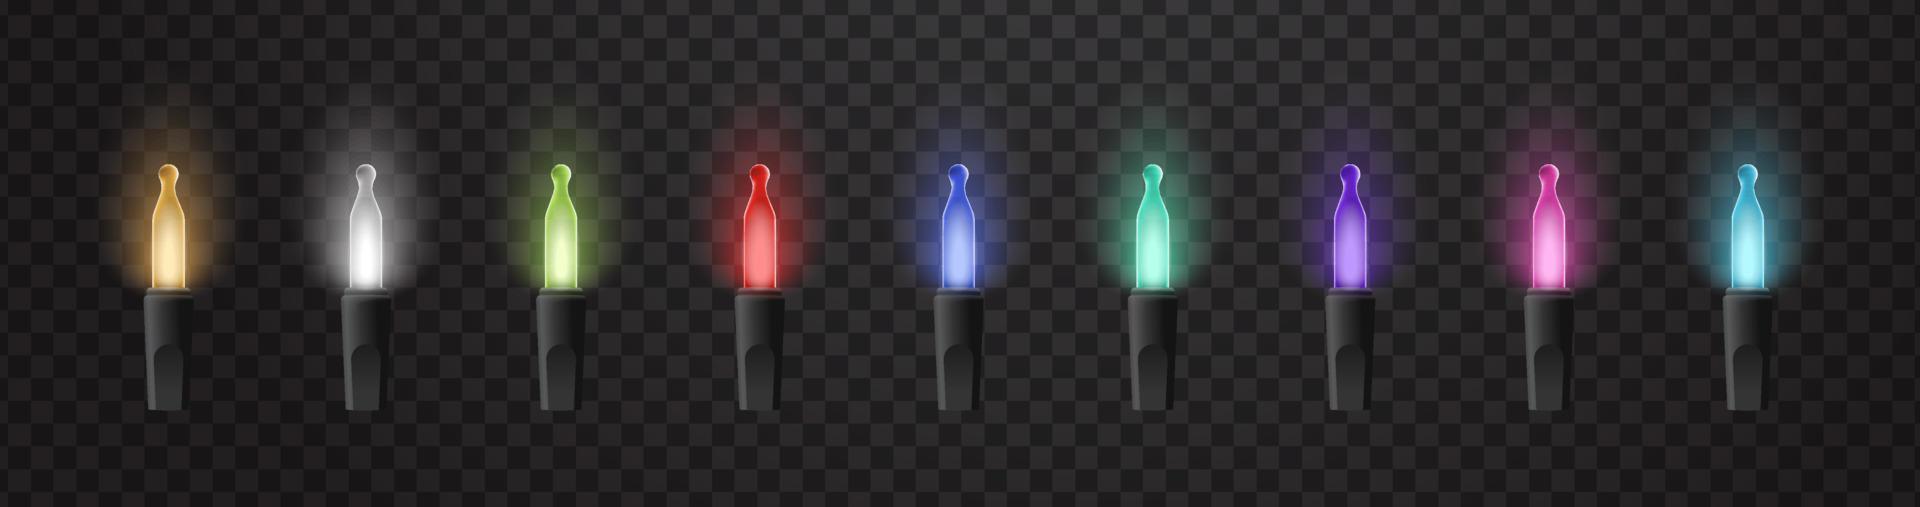 Set of colorful 3d realistic mini string christmas light isolated eps10 vector template